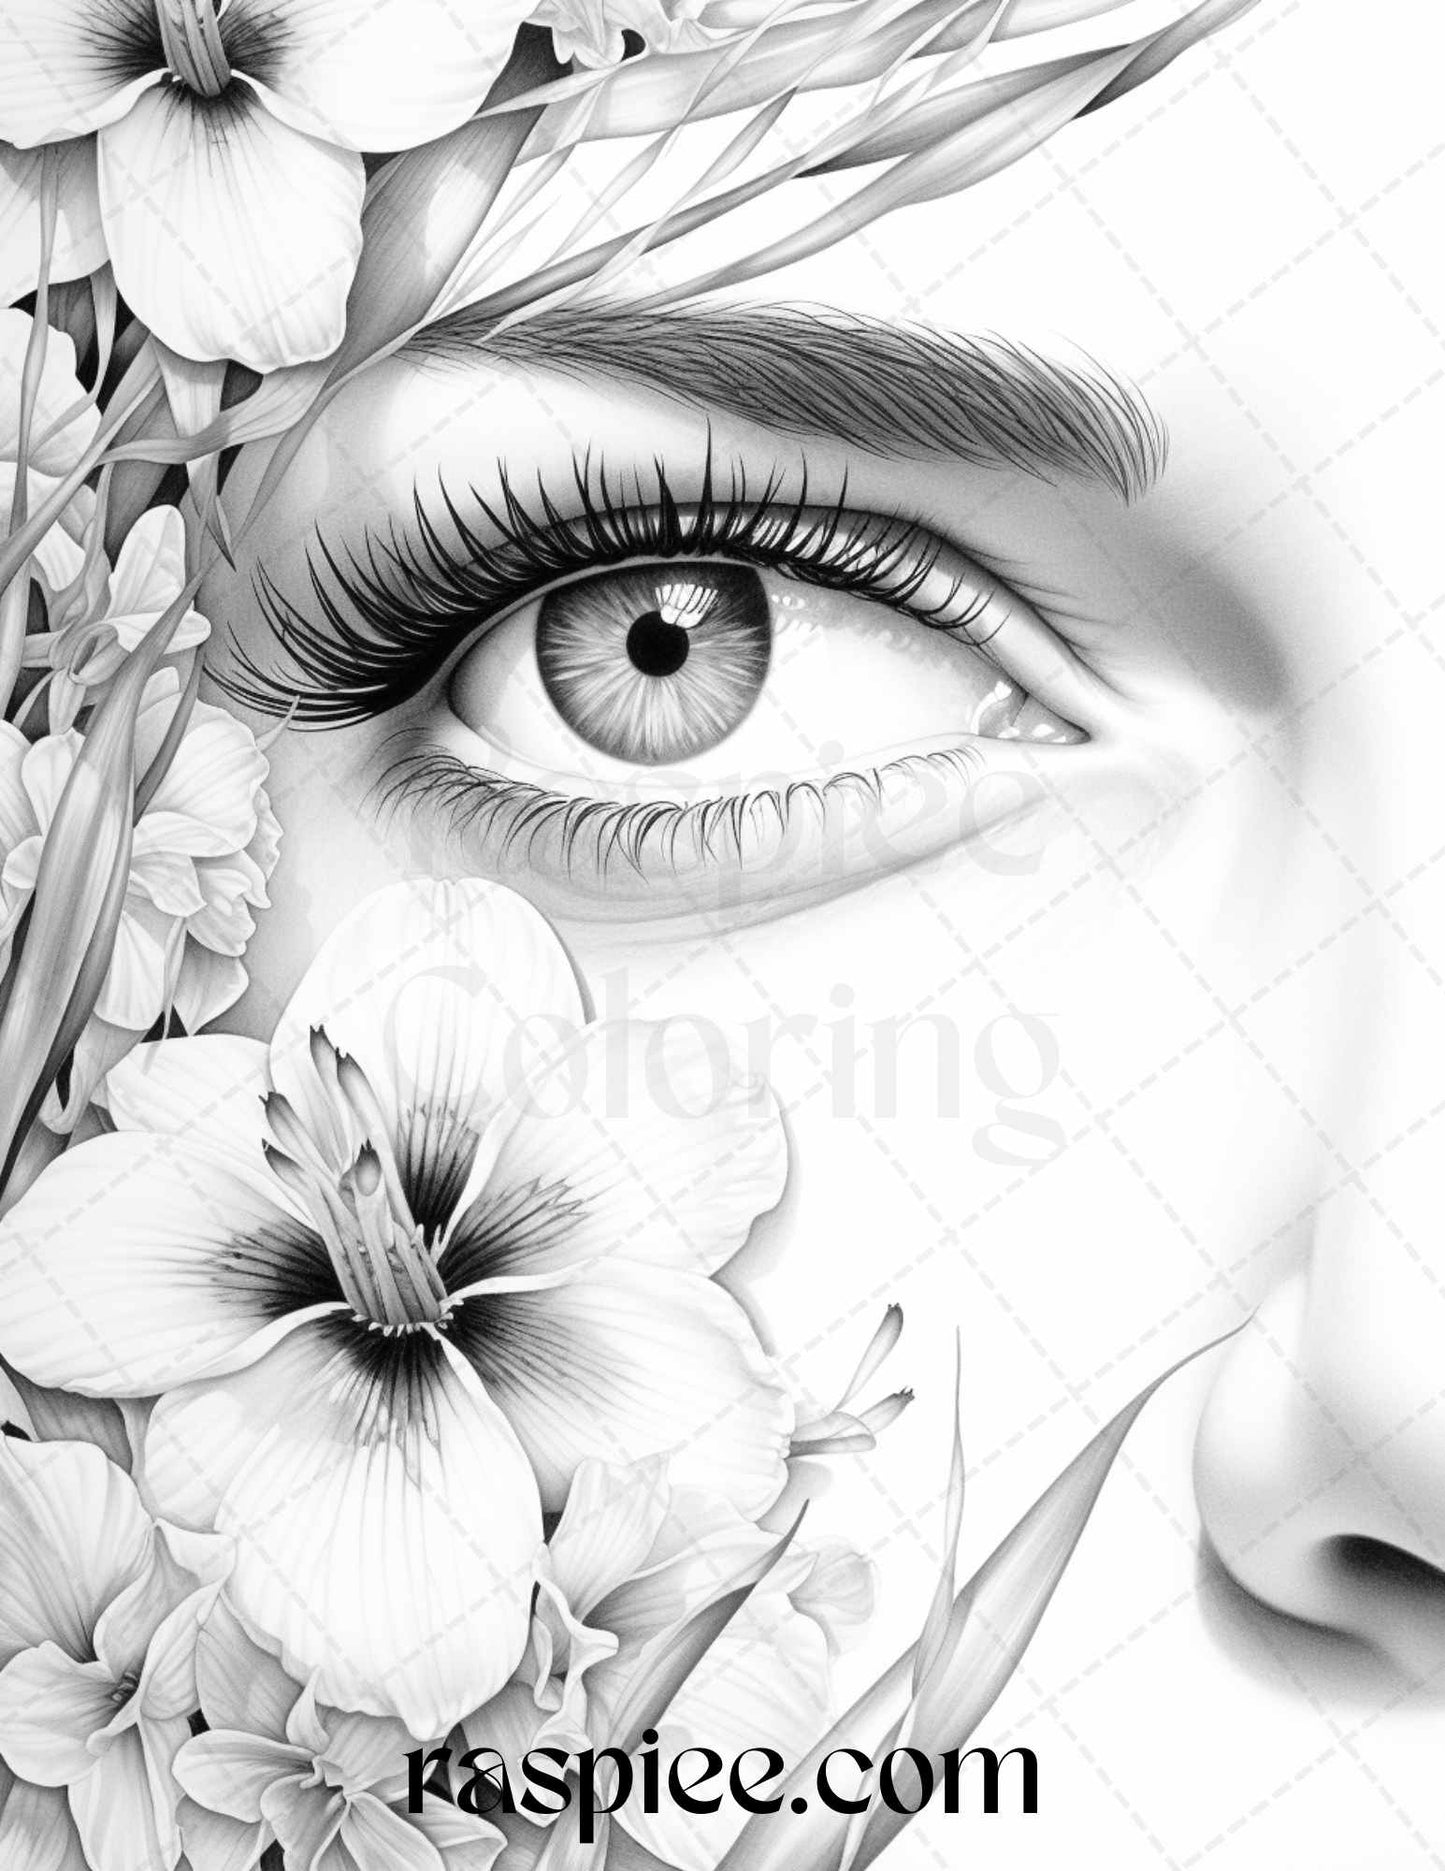 40 Charming Eyes Grayscale Coloring Pages Printable for Adults, PDF File Instant Download - Raspiee Coloring